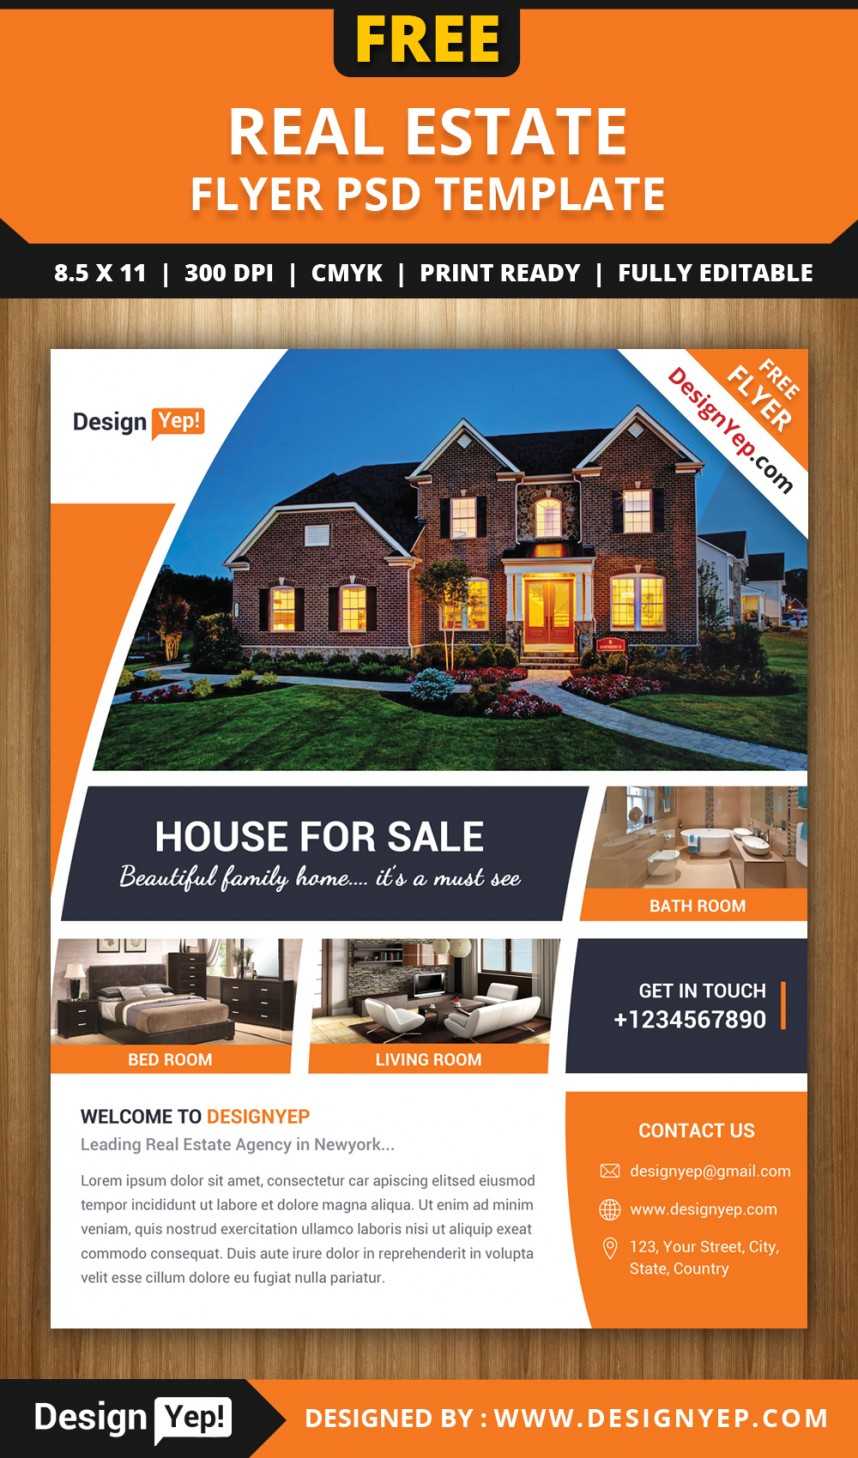 Awesome Free Real Estate Flyer Templates Template Ideas Psd Intended For Real Estate Brochure Templates Psd Free Download